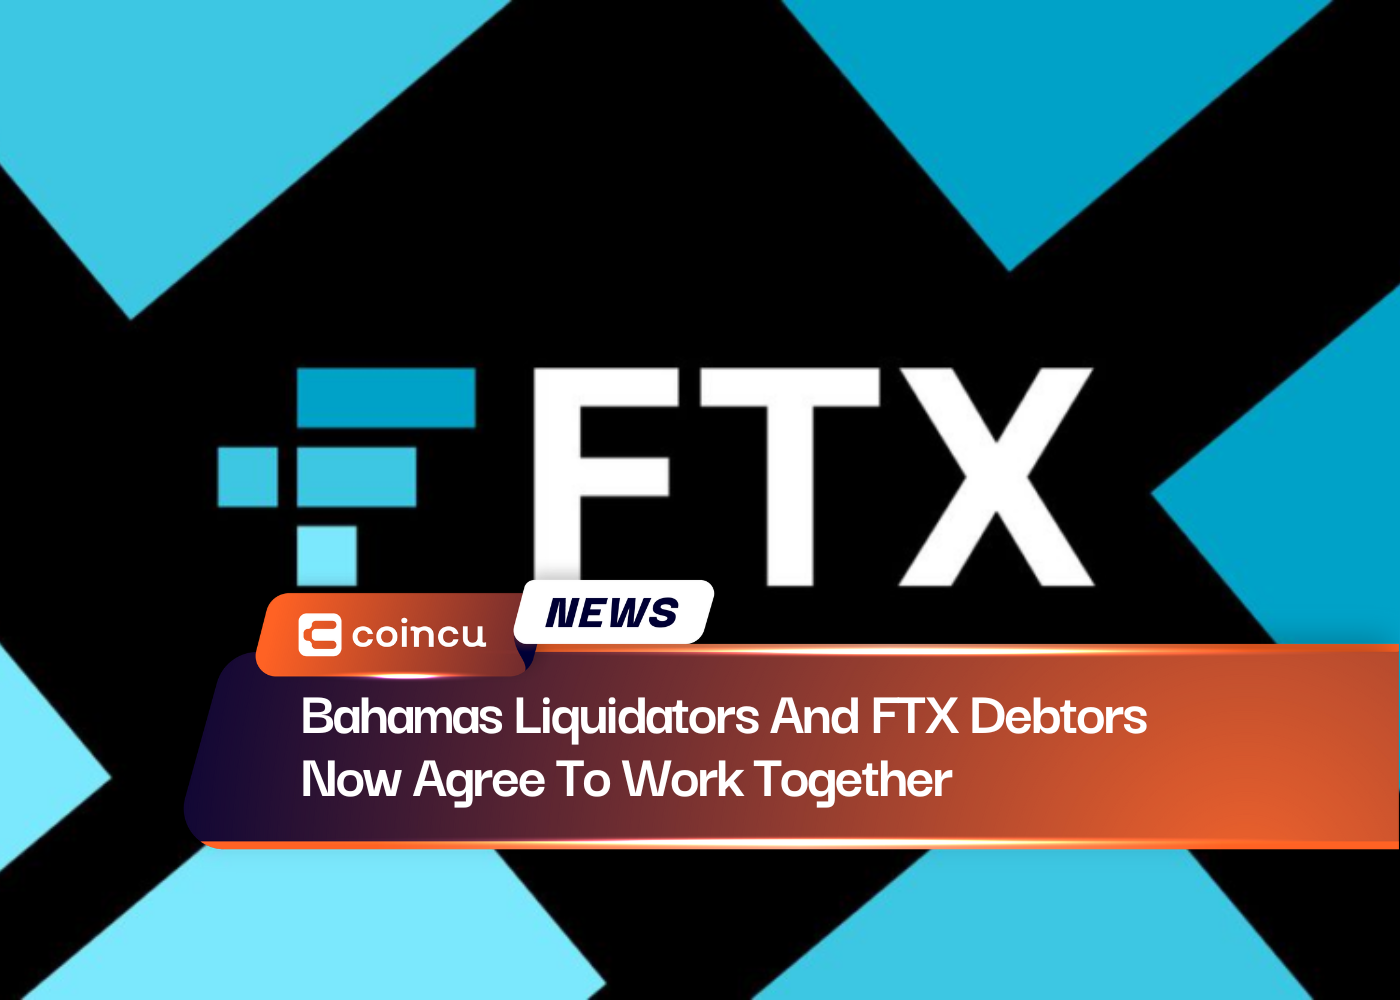 Bahamas Liquidators And FTX Debtors Now Agree To Work Together